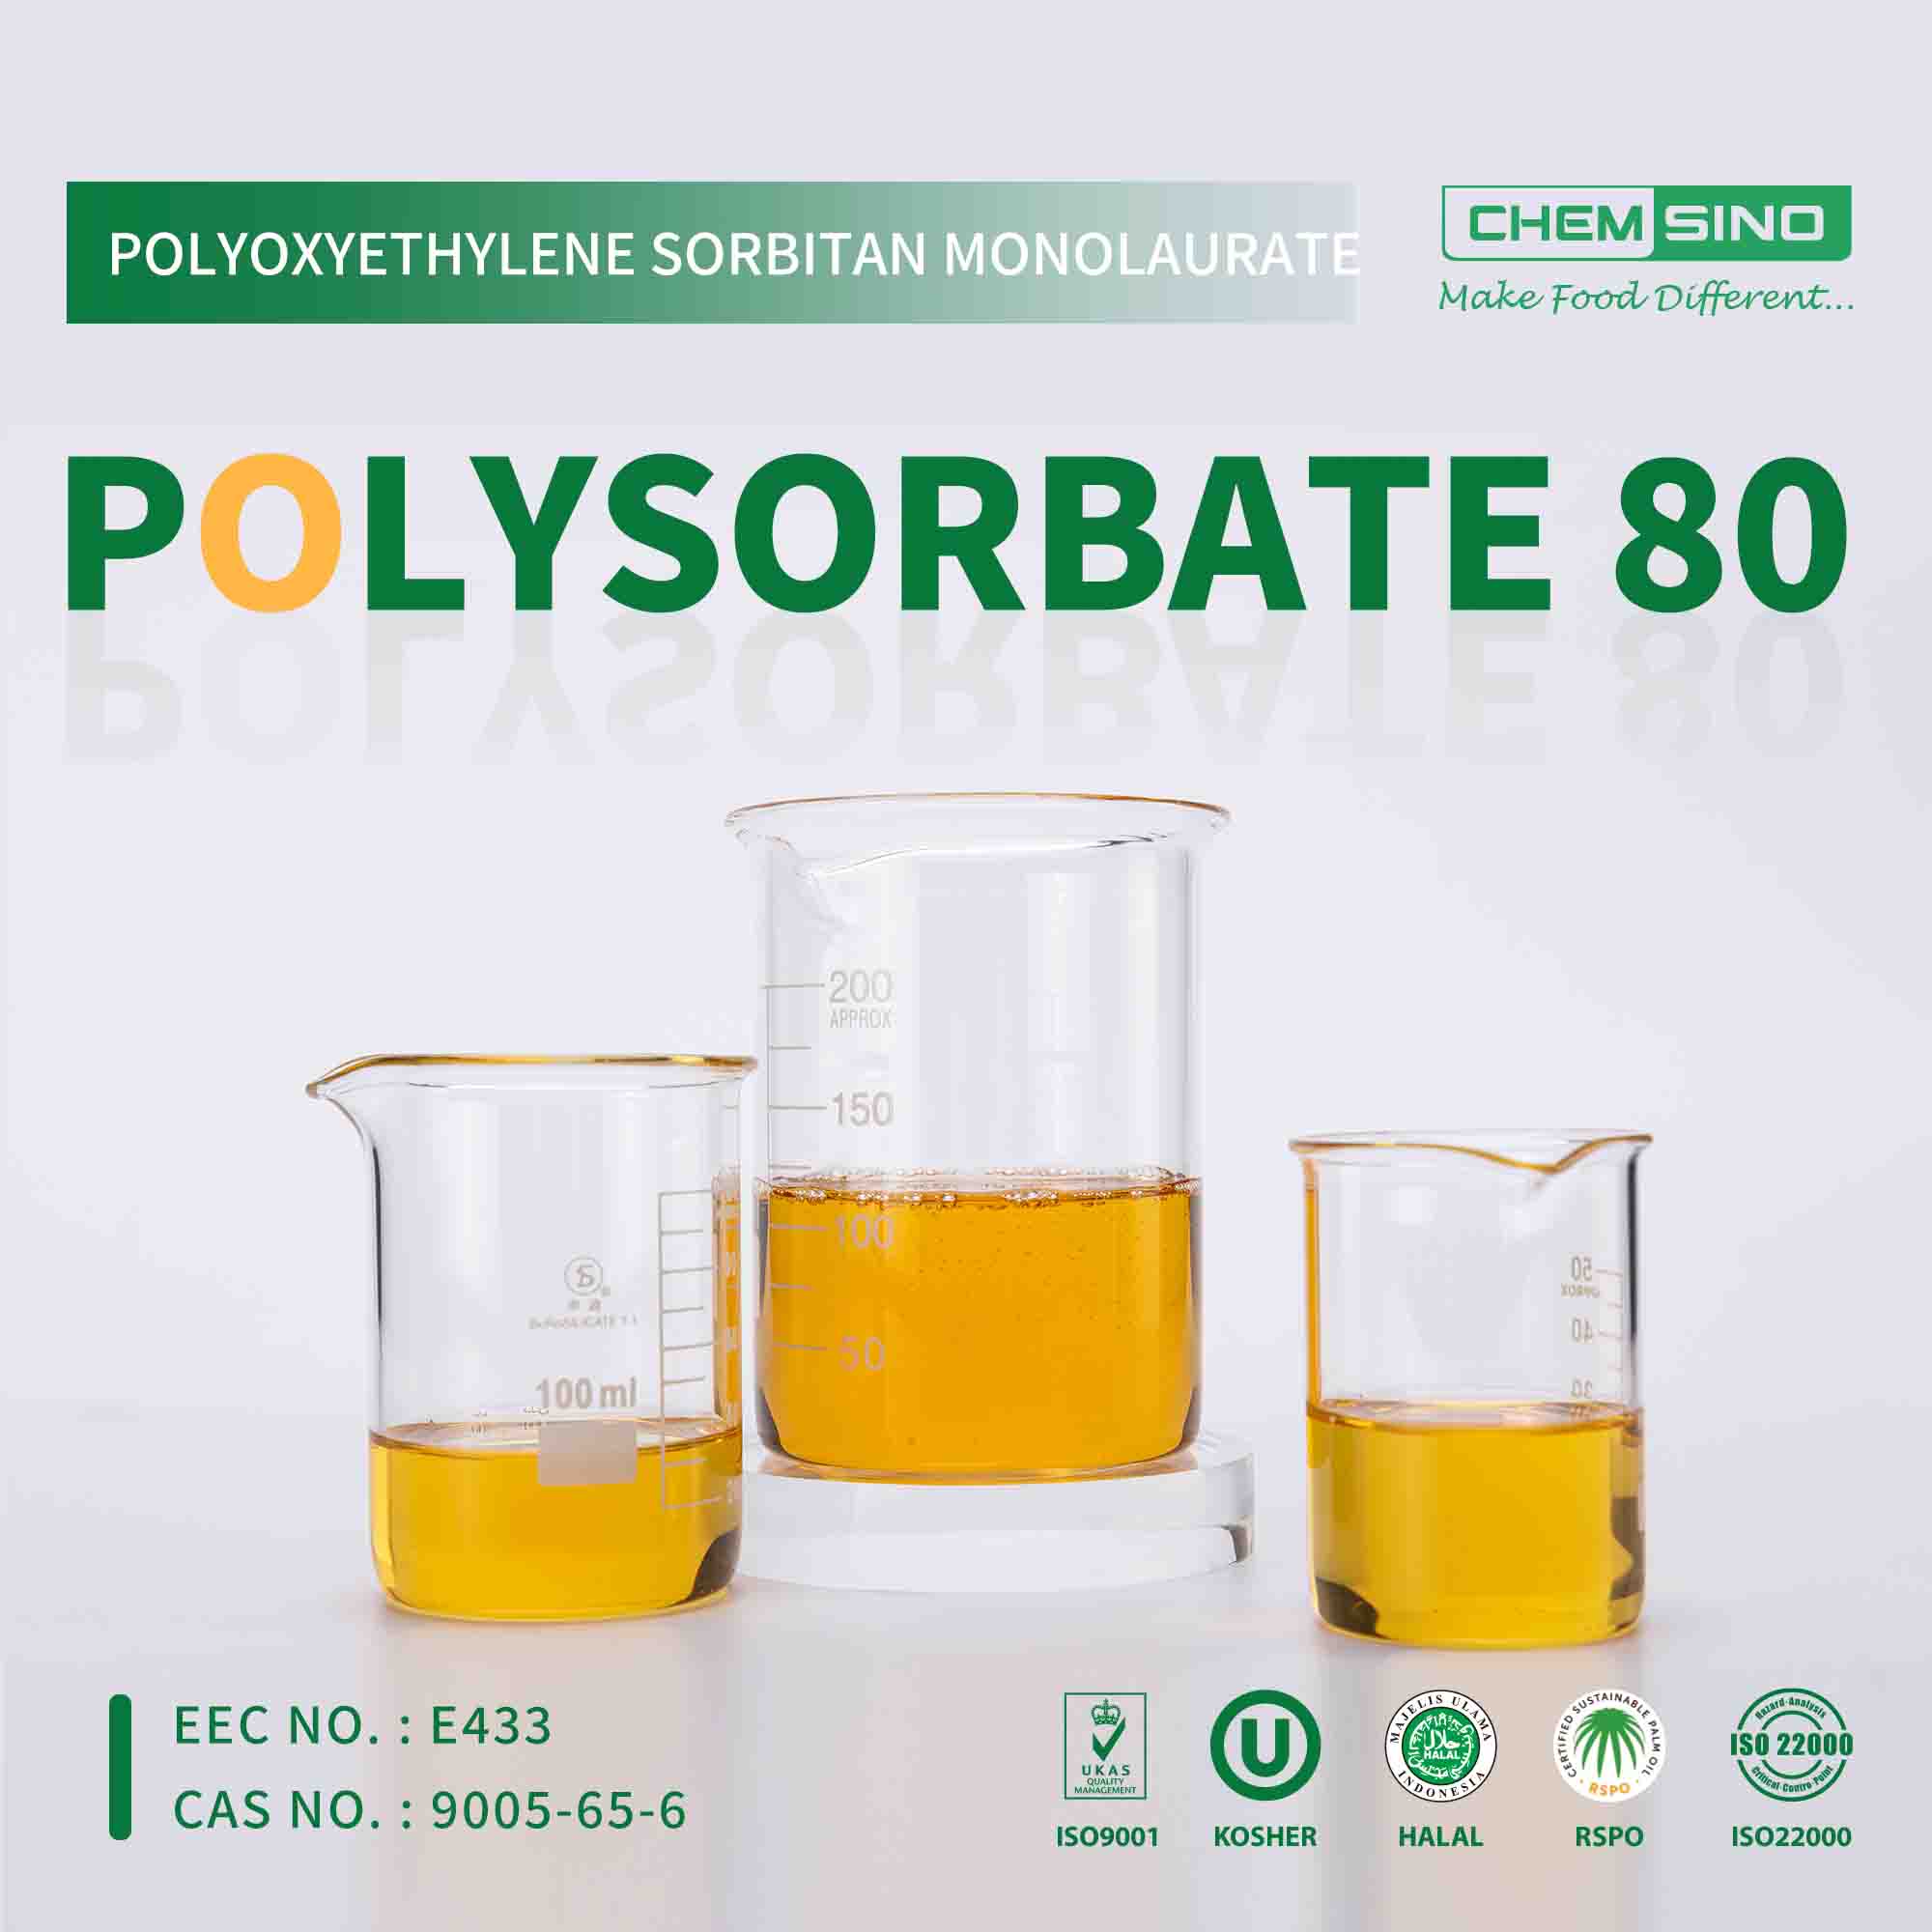 Polysorbate 80 Emulsifier Uses in Food and Cosmetics